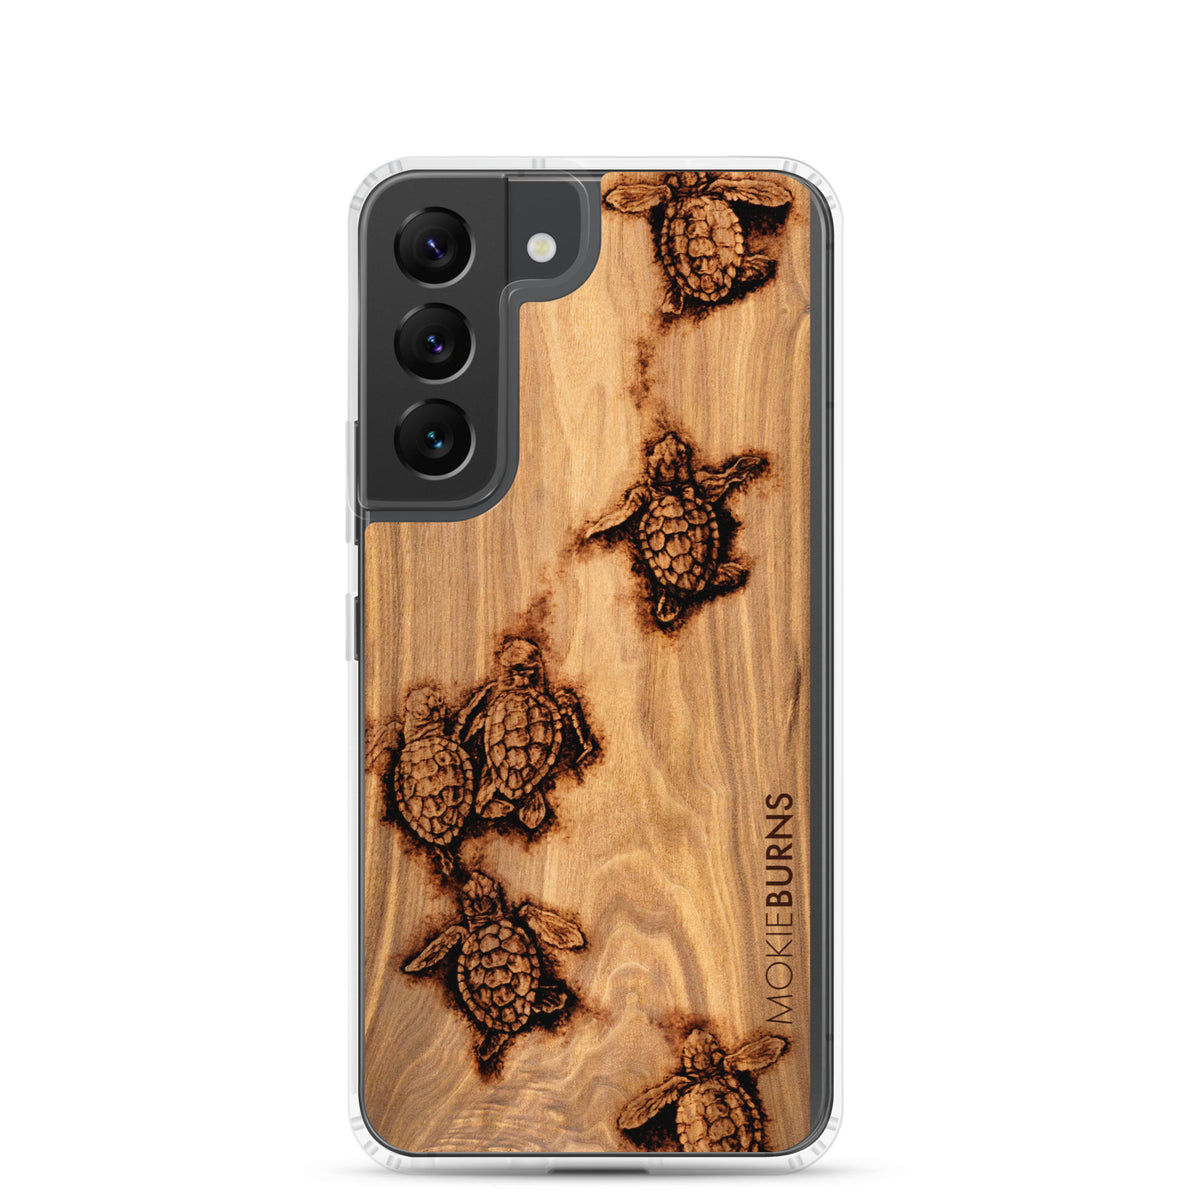 Baby Sea Turtles - Samsung Case [all sizes] - FREE SHIPPING